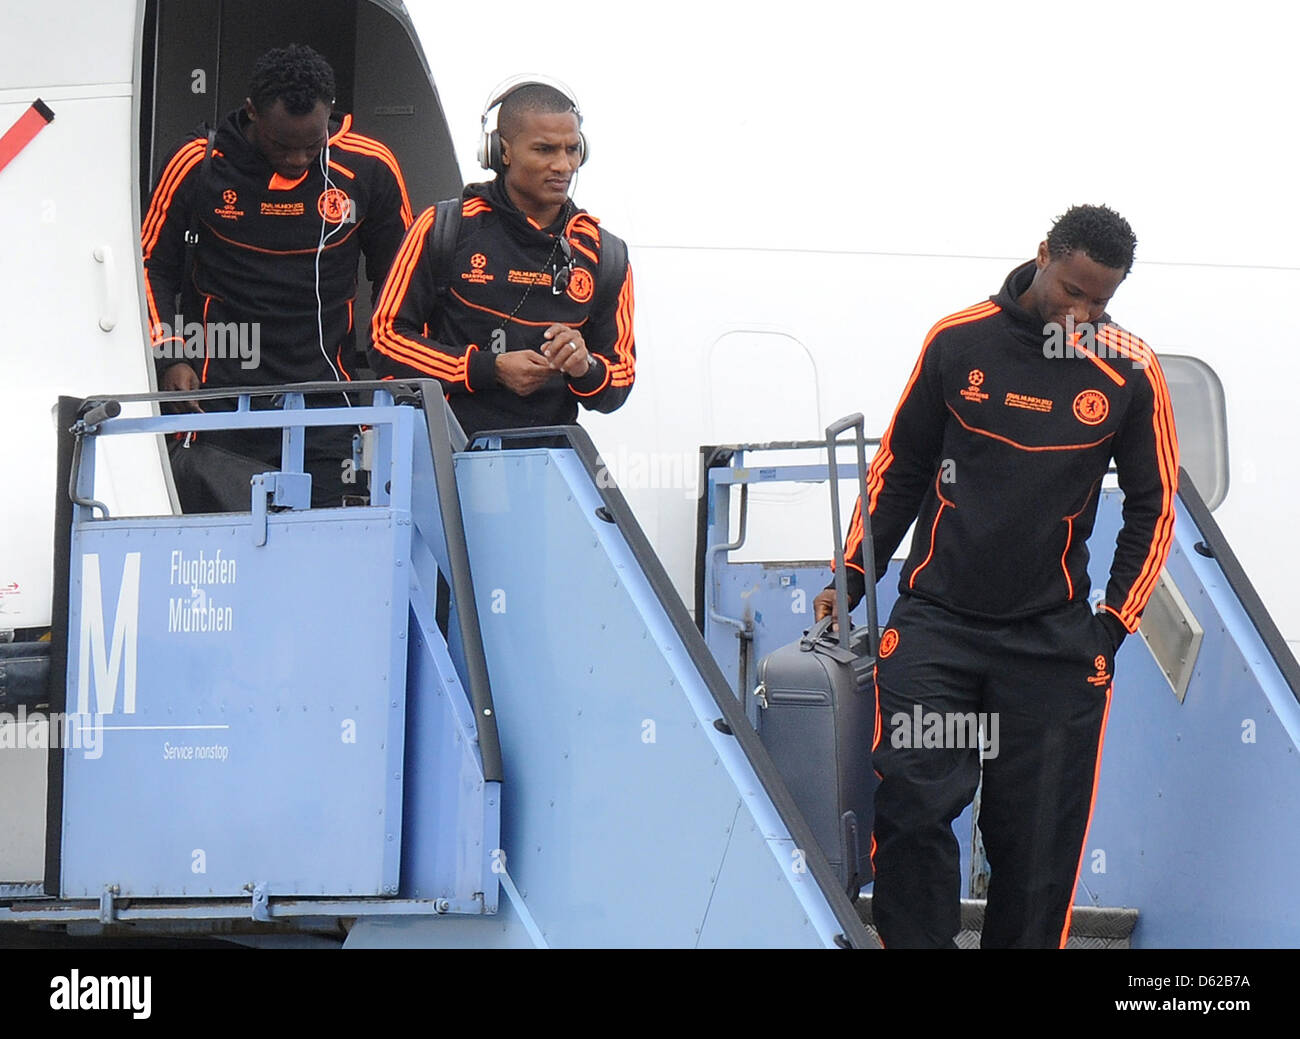 Chelsea's players Michael Essien (L), Florent Malouda (C) and John Obi Mikel (R) arrive at Munich Airport, Germany, 18 May 2012. FC Chelsea will face FC Bayern Munich in the UEFA Champions League soccer final in Munich on 19 May 2012. Photo: Marc Mueller dpa/lby  +++(c) dpa - Bildfunk+++ Stock Photo